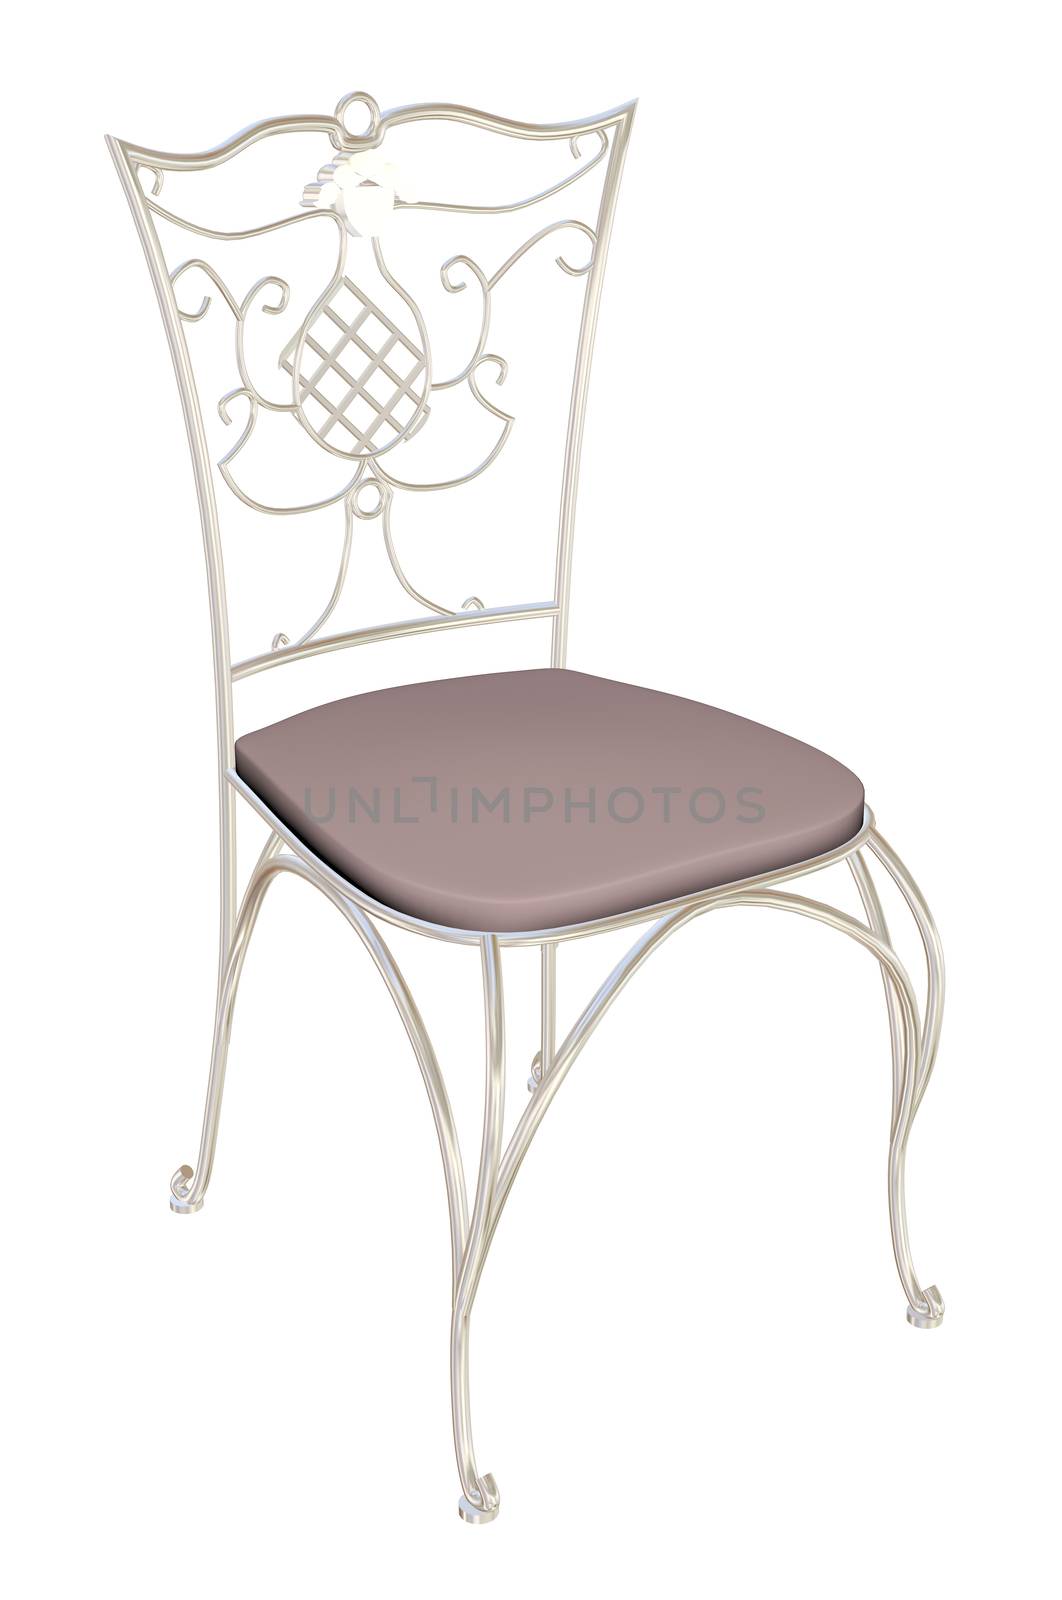 Cast-iron chair with padded seat, 3D illustration by Morphart